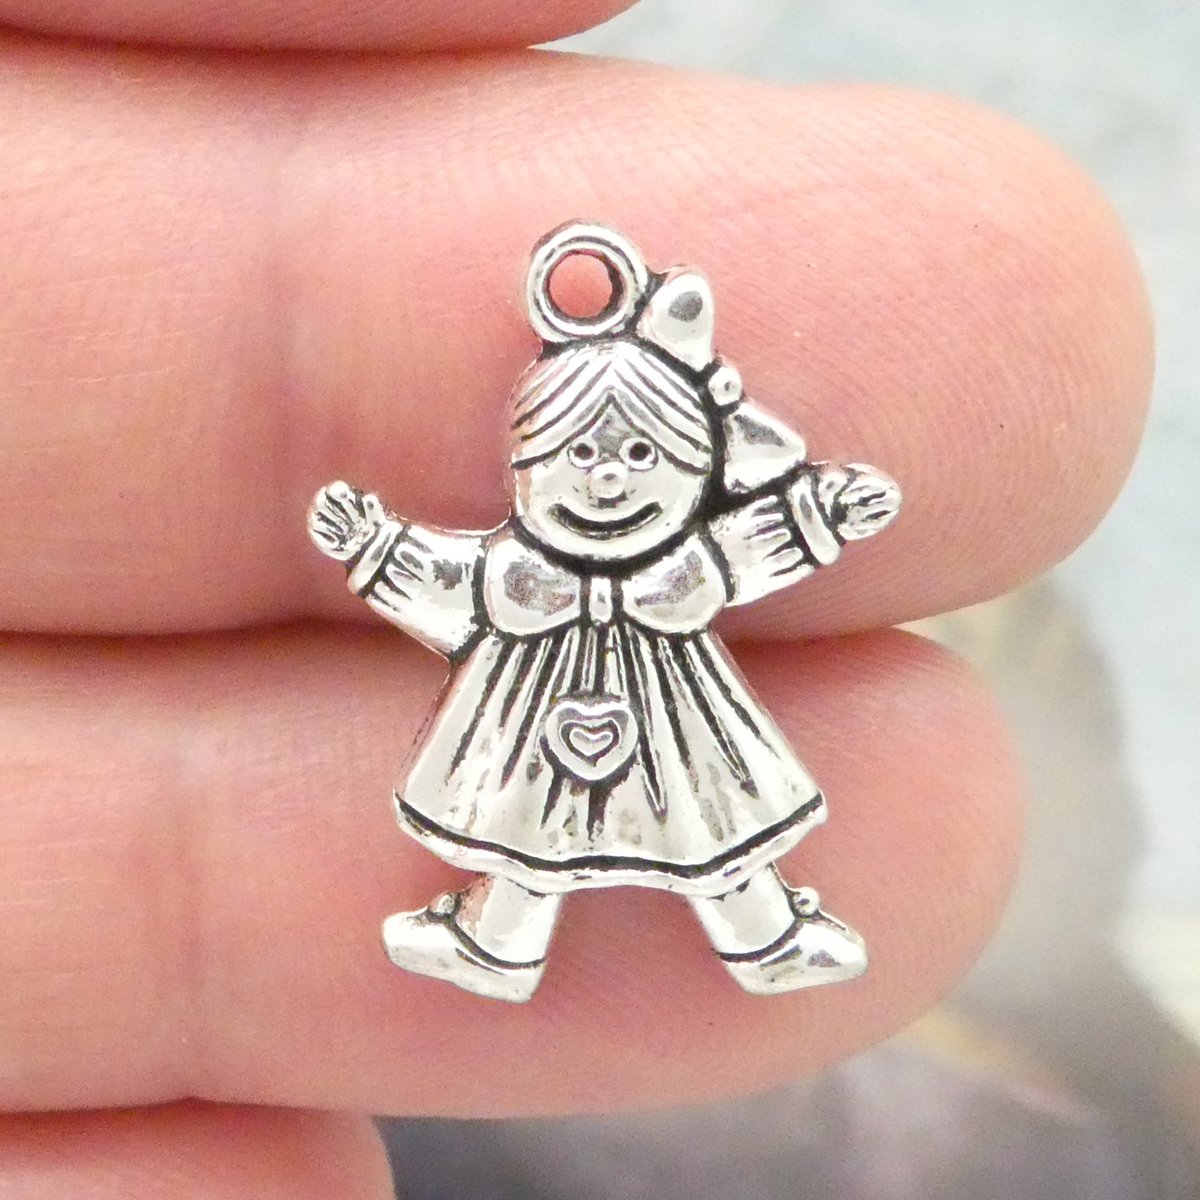 Excited to share the latest addition to my #etsy shop: 12 Silver Rag Doll Charm 24x17mm by TIJC SP0422 etsy.me/3goHGwX #silver #toycharm #silvertoycharm #dollcharm #dolljewelry #dollnecklace #toyjewelry #doll #toynecklace